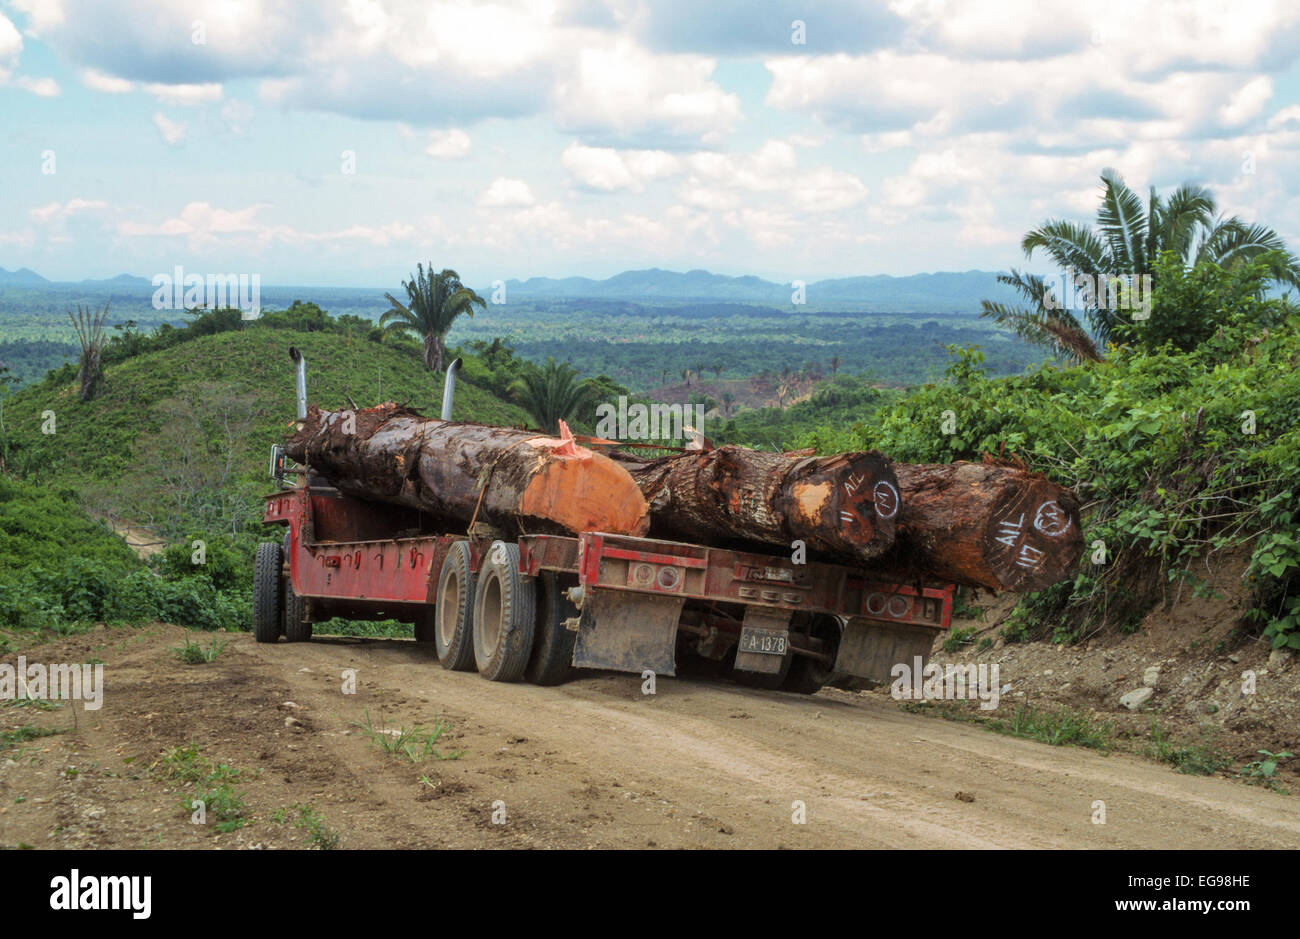 Tropical rainforest logging. Truck hauling hardwood trees cut in a selective logging operation. The logs are Santa Maria (left) and Mahogany (c, r) Stock Photo